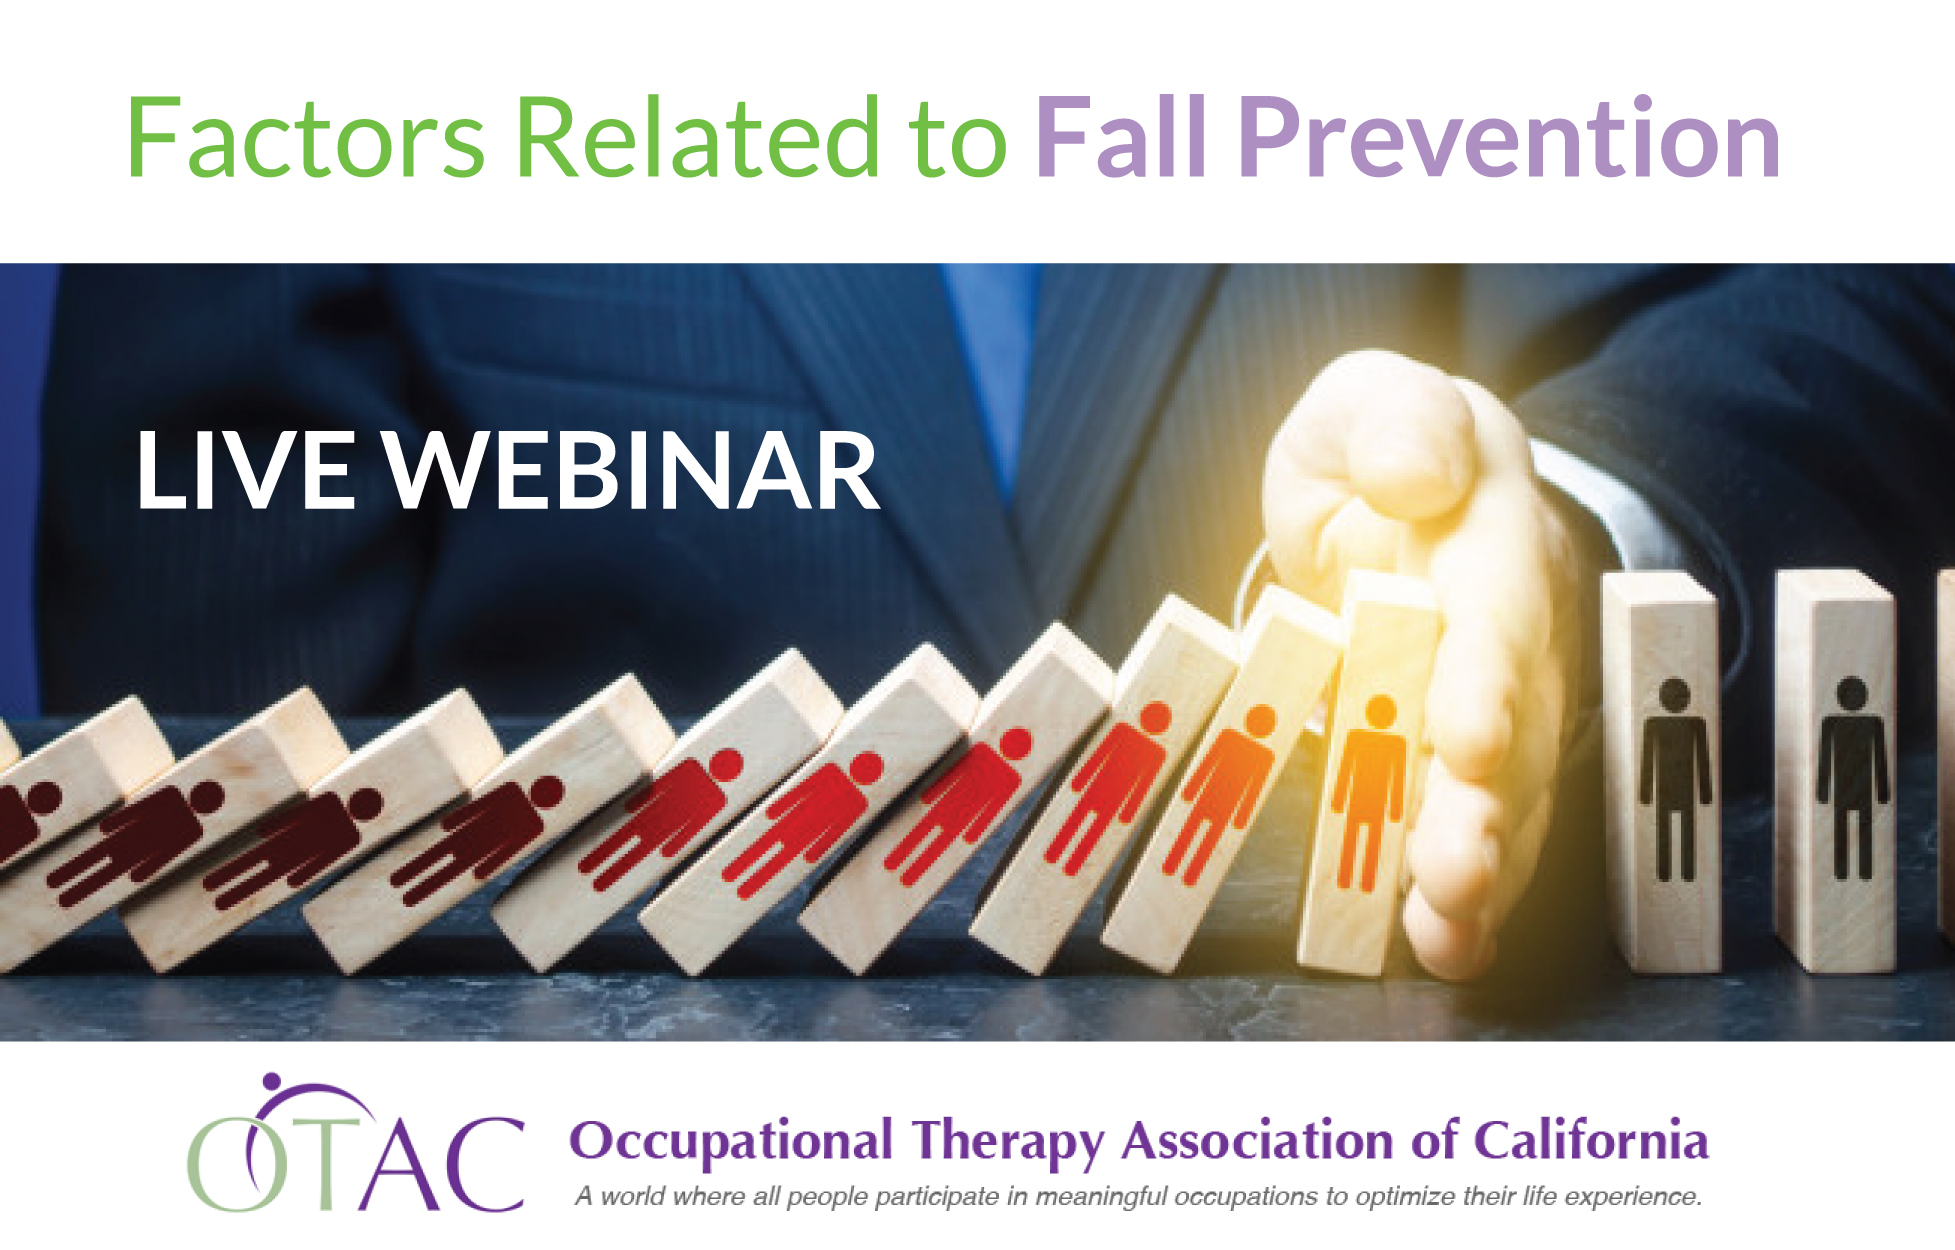 LIVE WEBINAR – FACTORS RELATED TO FALL PREVENTION